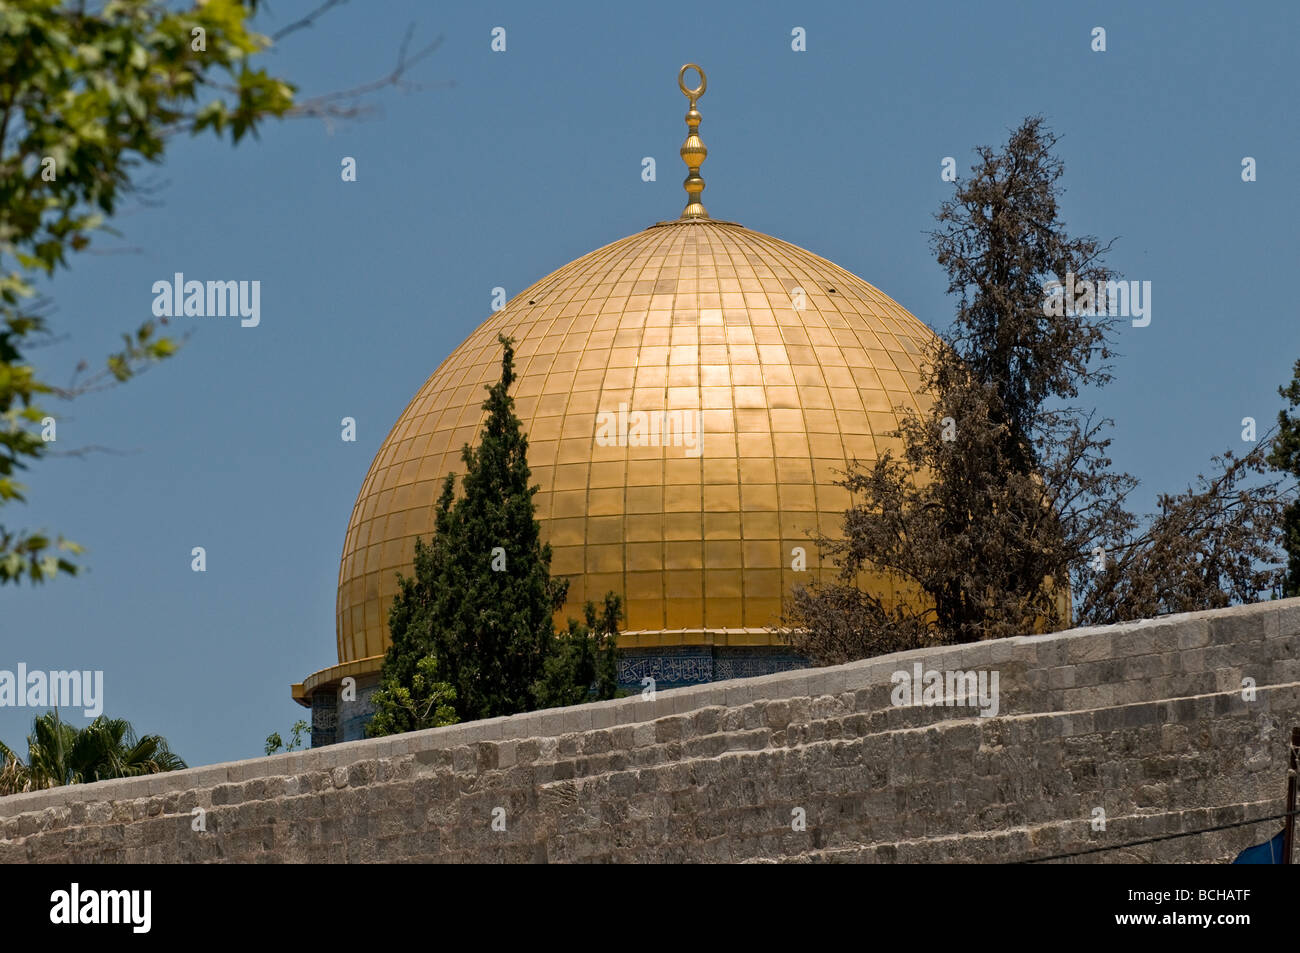 The Dome of the Rock, Muslim mosque on the Temple Mount, Jerusalem, Israel Stock Photo